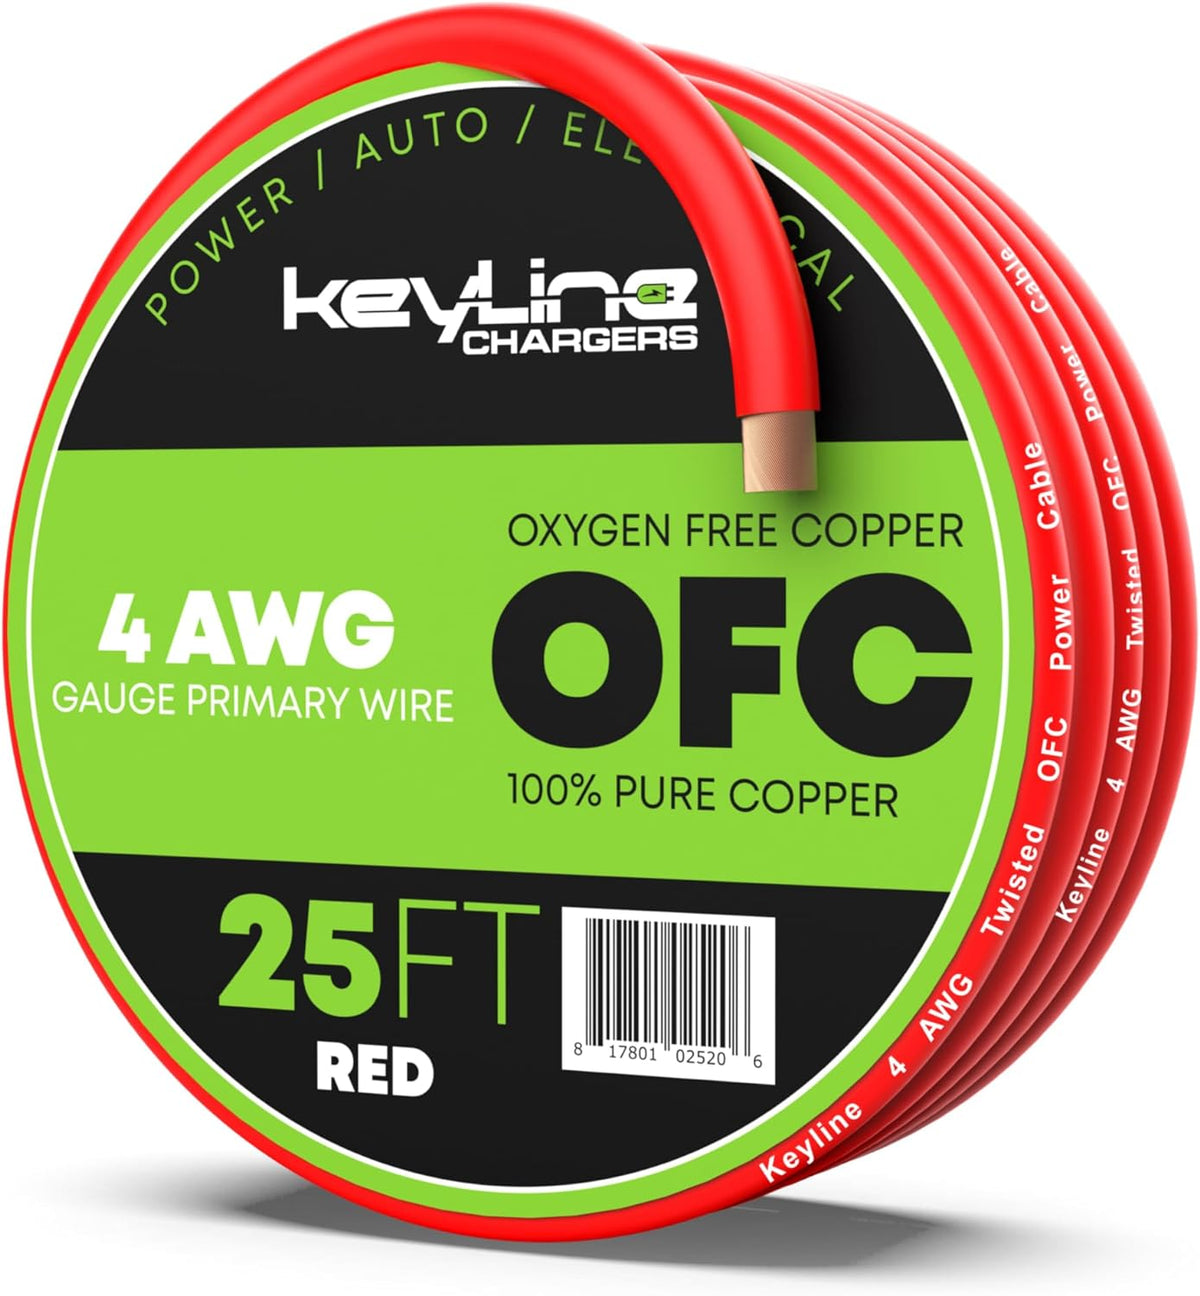 OFC 4 AWG Gauge Wire (25ft) Red | Oxygen Free Copper, Automotive Wire, Power/Ground, Battery Cable, True Spec Welding & Automotive, Car Audio Speaker, RV Trailer, Amp Wiring by Keyline Chargers